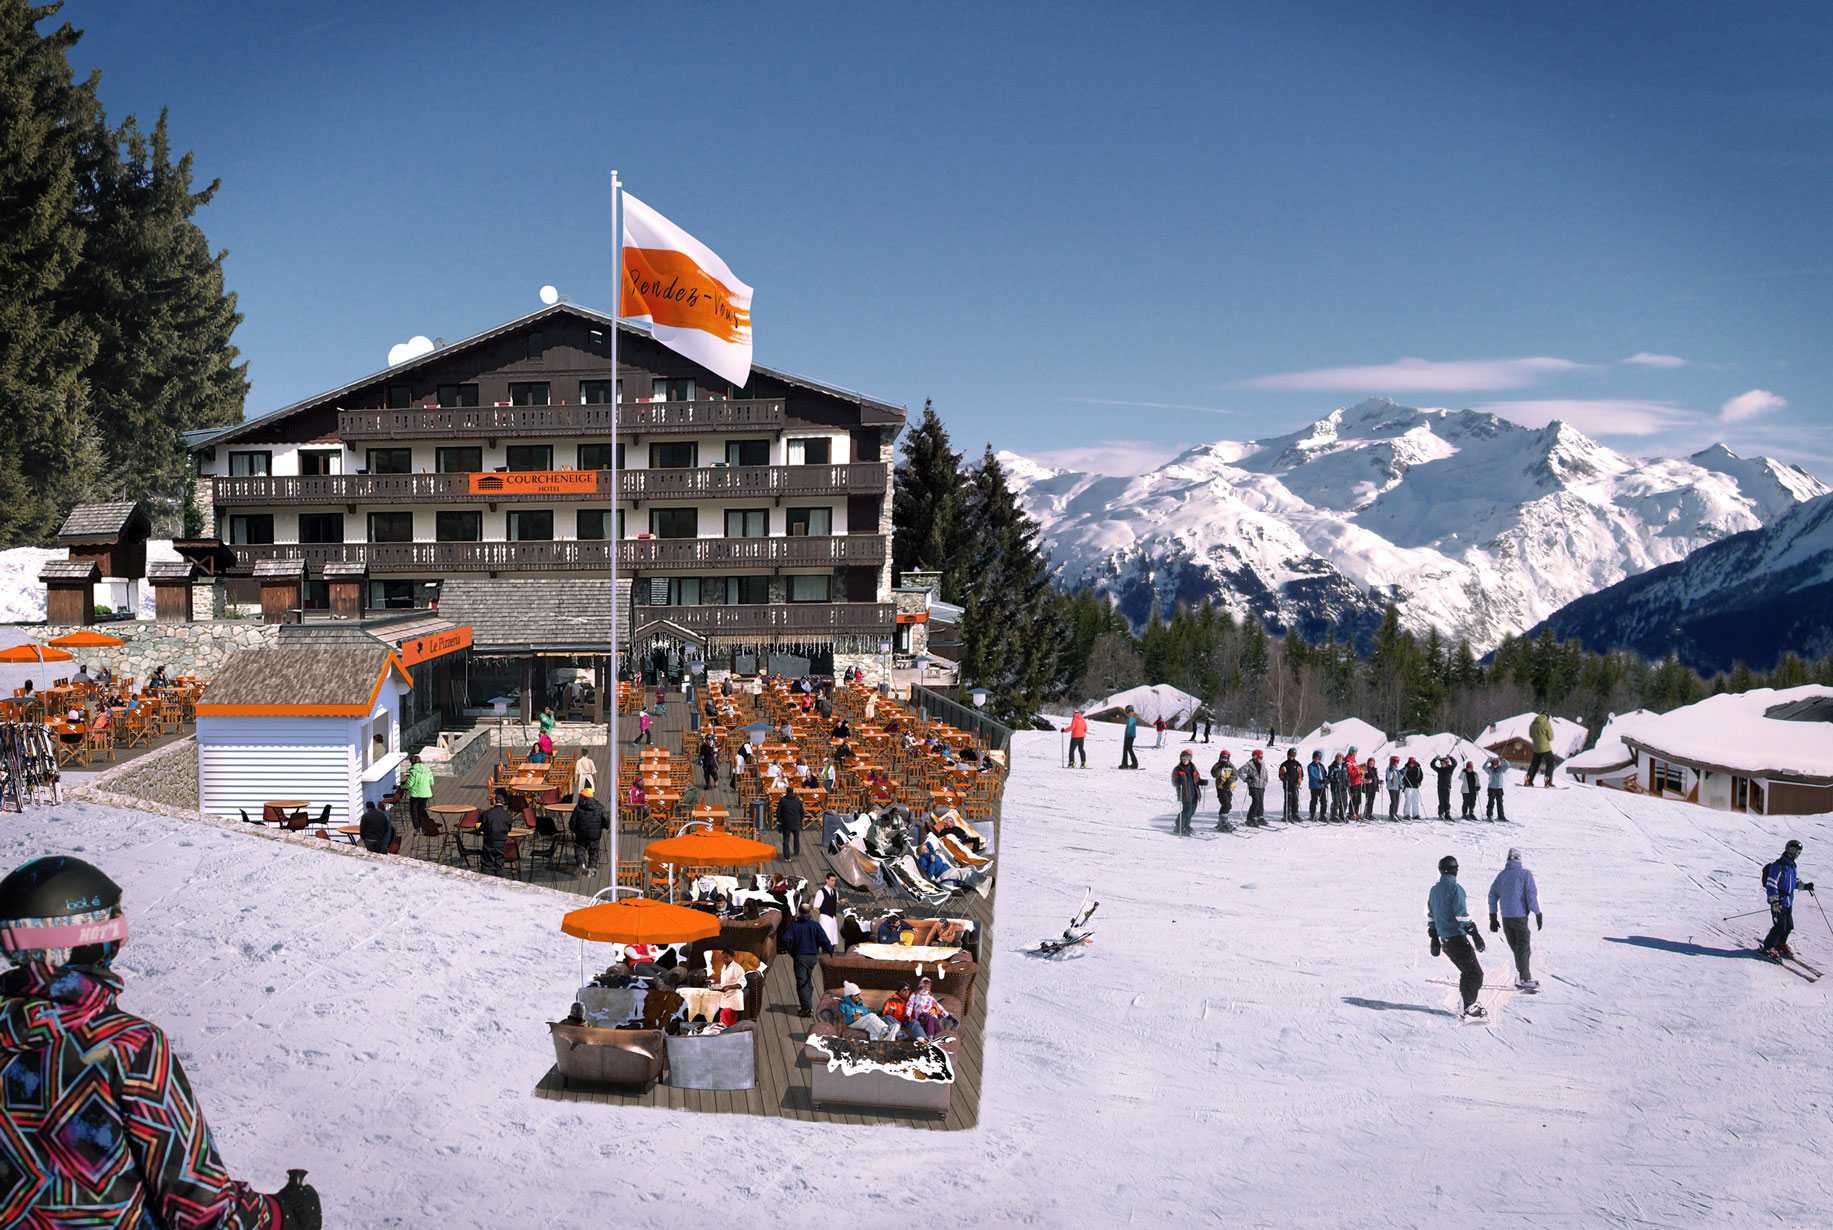 Rather like the ski lift from Bozel, the demolition and